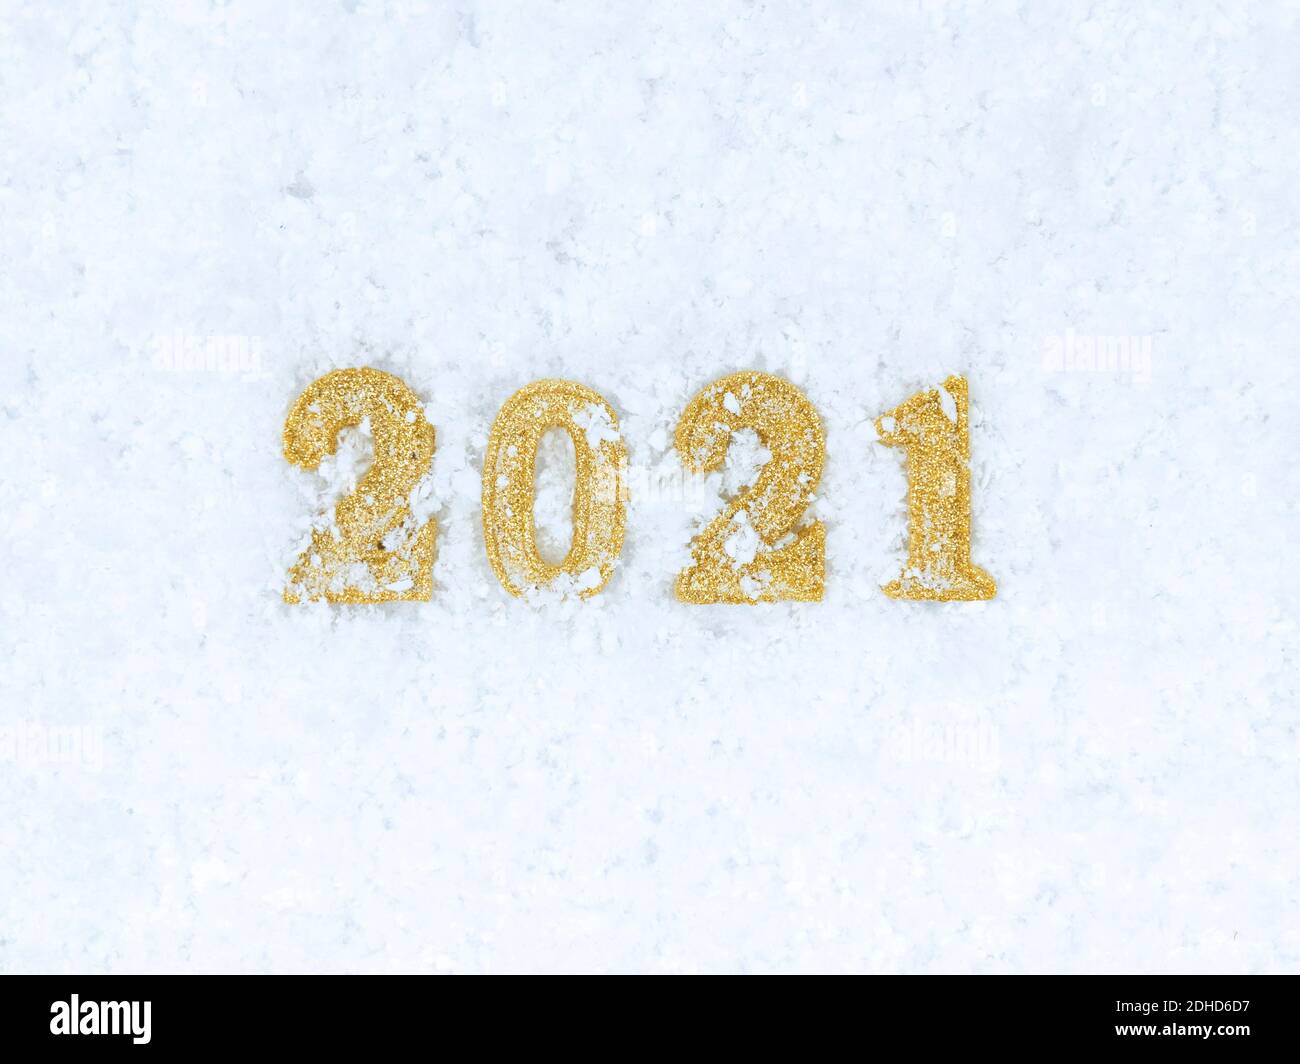 New year 2021 figures on white snow texture background. Stock Photo